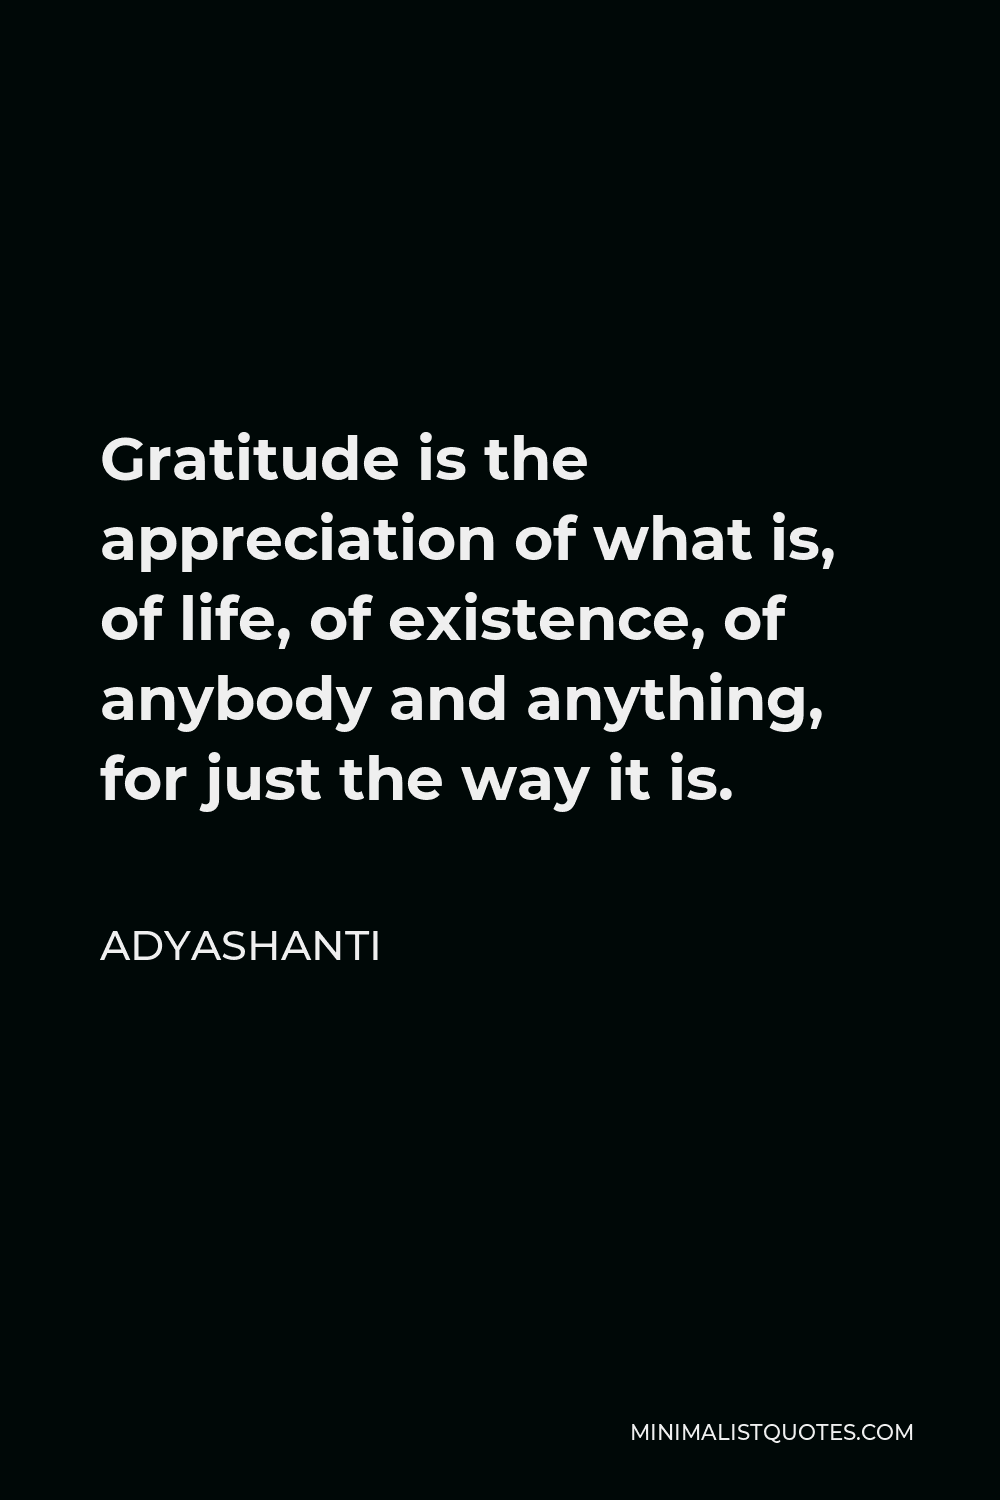 Adyashanti Quote - Gratitude is the appreciation of what is, of life, of existence, of anybody and anything, for just the way it is.